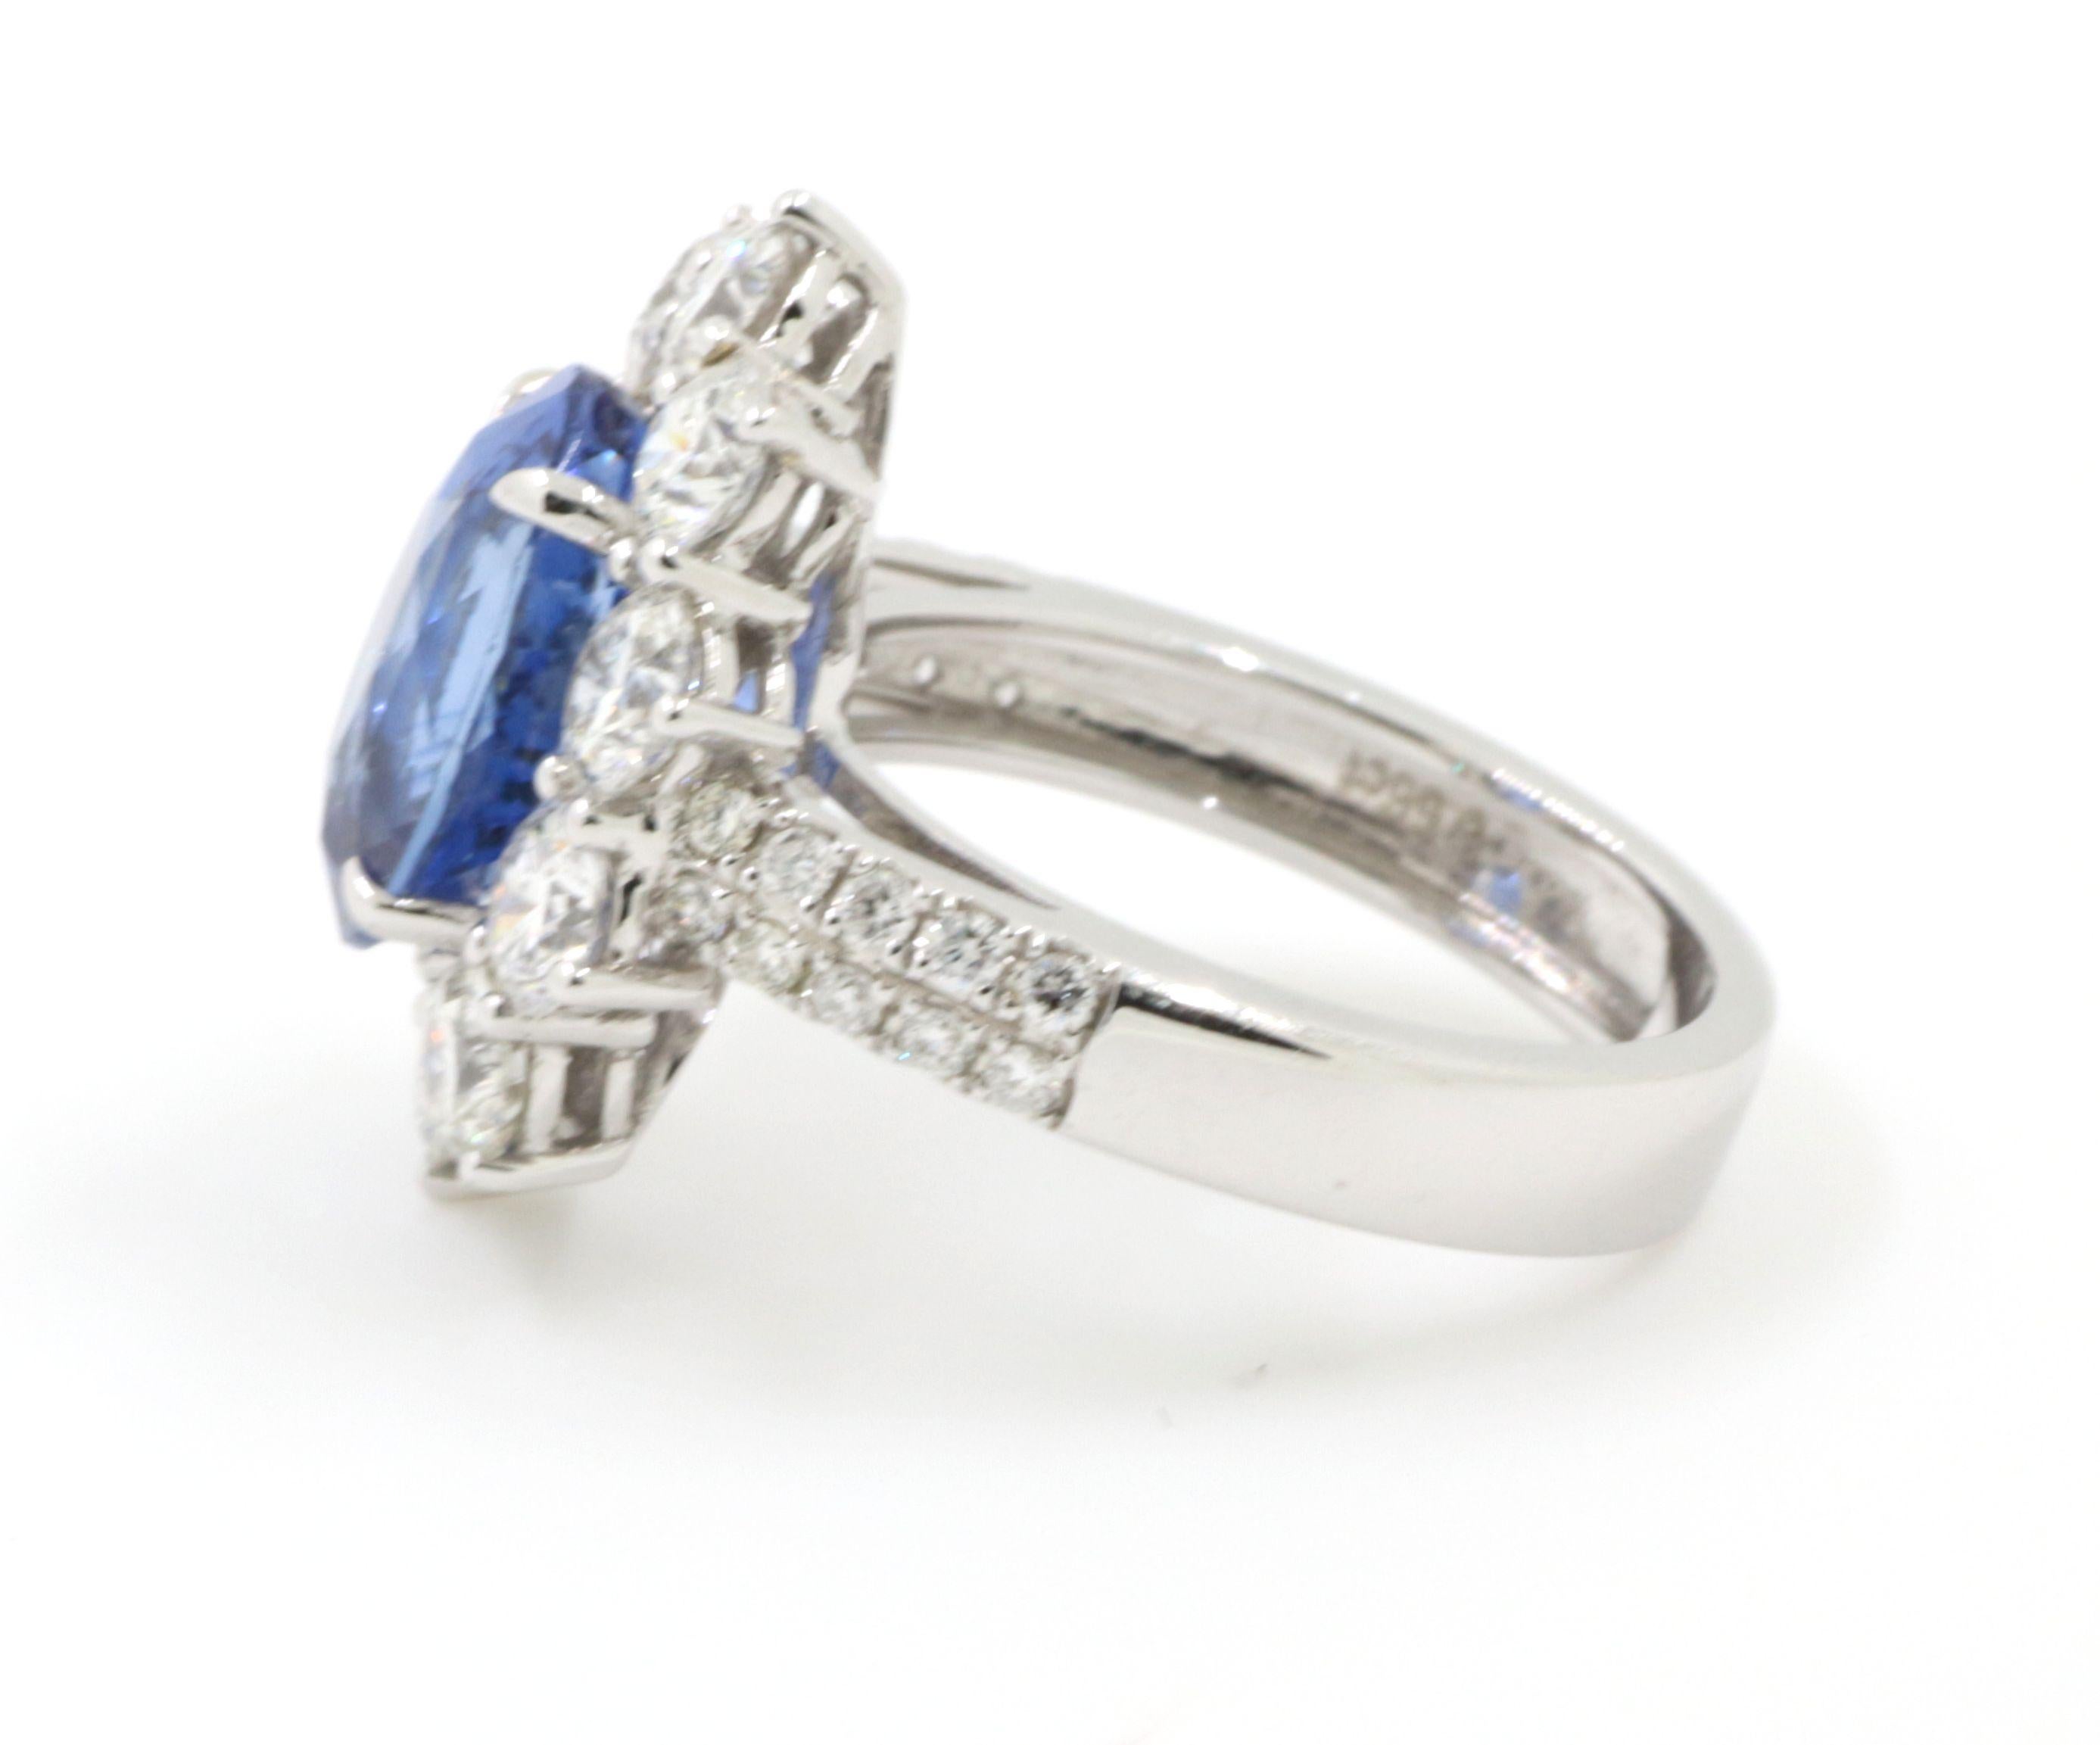 Contemporary GRS Certified 5.55 Carat Blue Sapphire and Diamond Ring in 18K White Gold For Sale